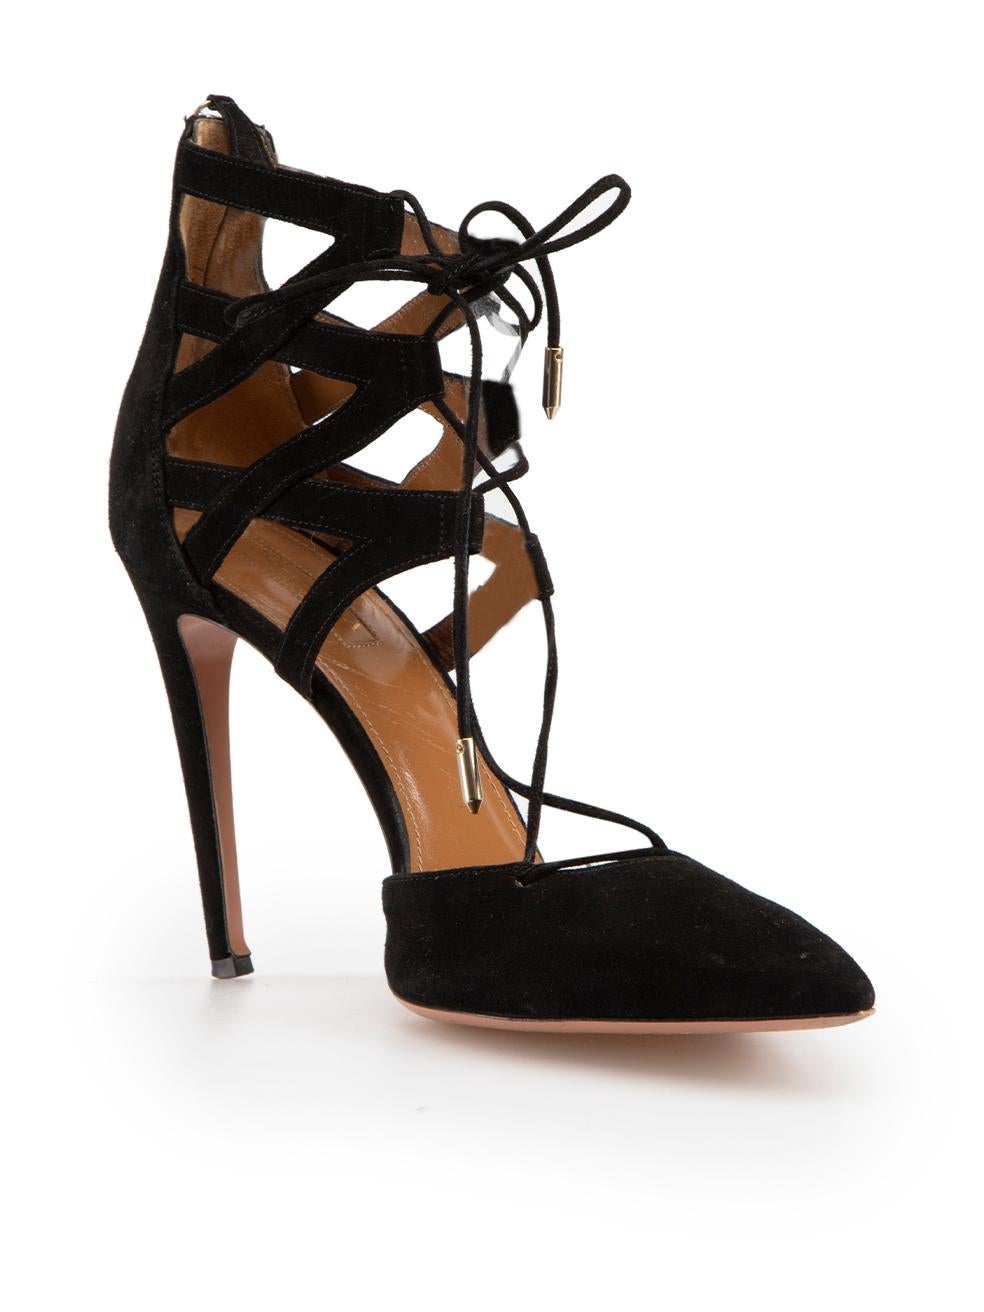 CONDITION is Good. Minor wear to shoes is evident. Light wear to both sides and heels of both shoes with abrasions and scratches to the suede on this used Aquazzura designer resale item.

Details
Belgiavia
Black
Suede
Heels
Point toe
Lace up